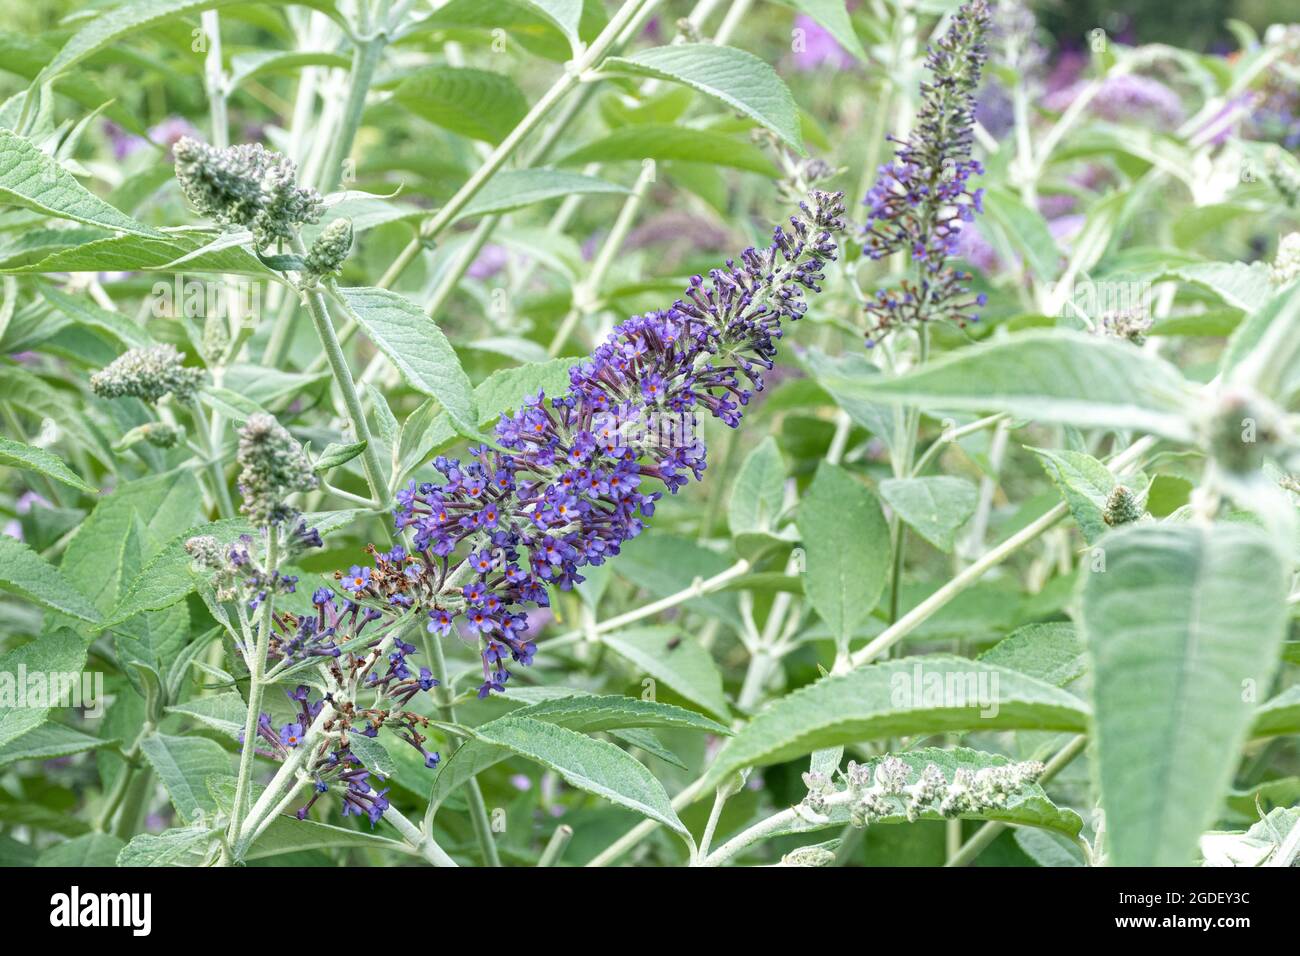 Buddleja davidii 'Southcombe Splendour' (buddleia variety), known as a butterfly bush, in flower during august or summer, UK Stock Photo